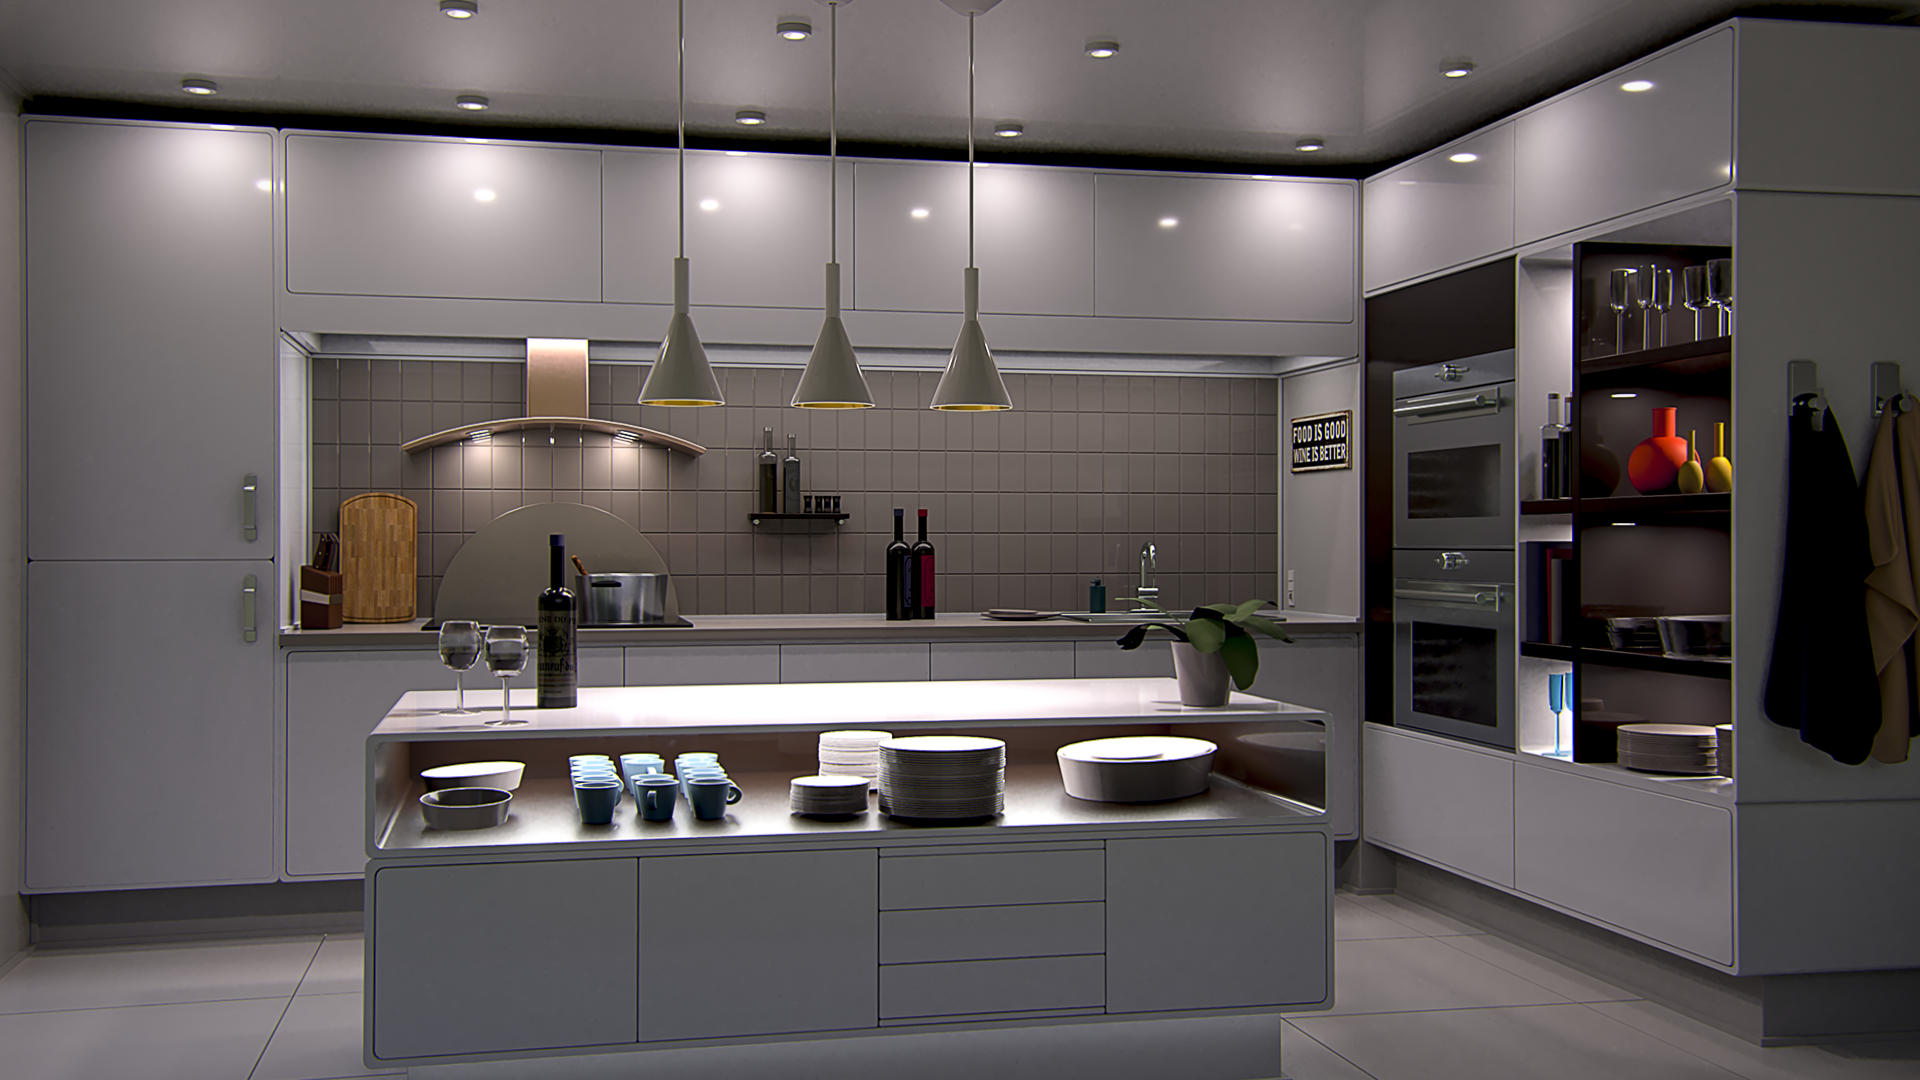 3D rendering of a kitchen